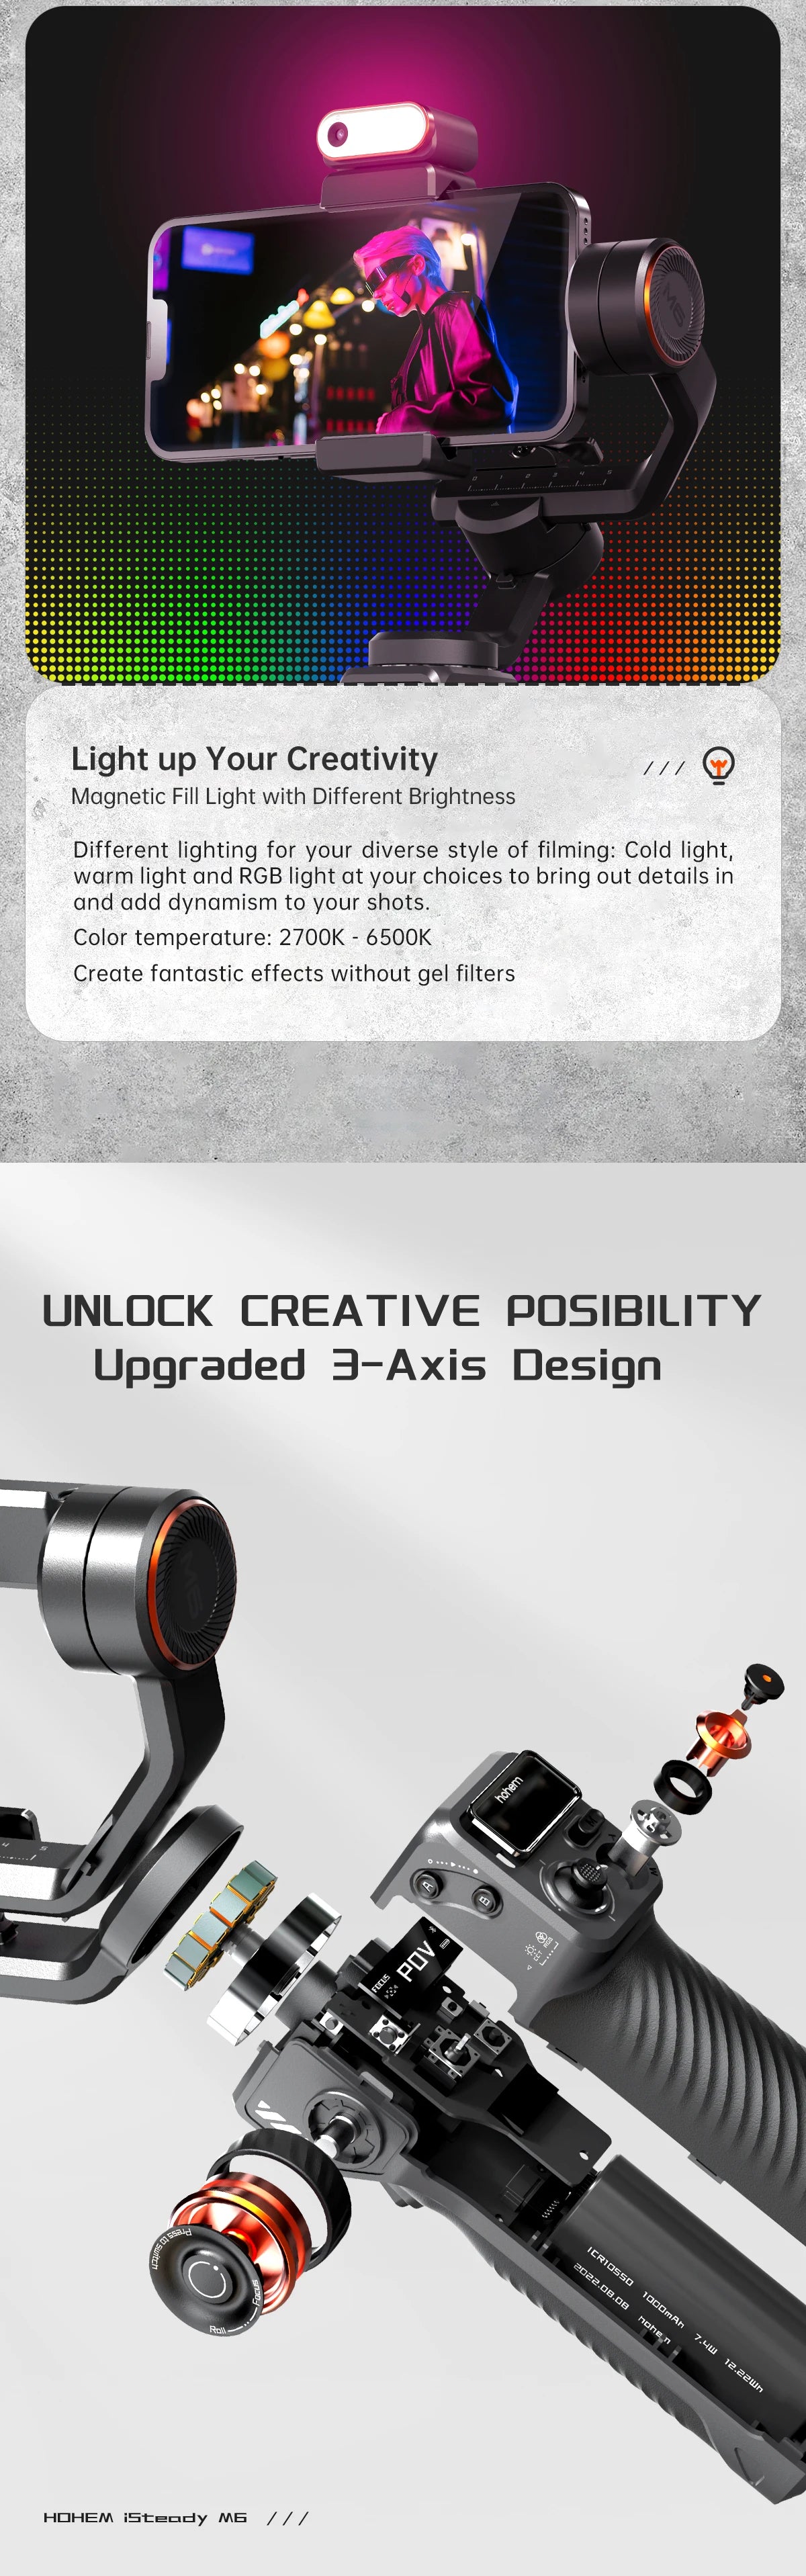 AI Tracker with Adjustable  Stabilizing Tripod For Smartphone For Content Creators/Bloggers